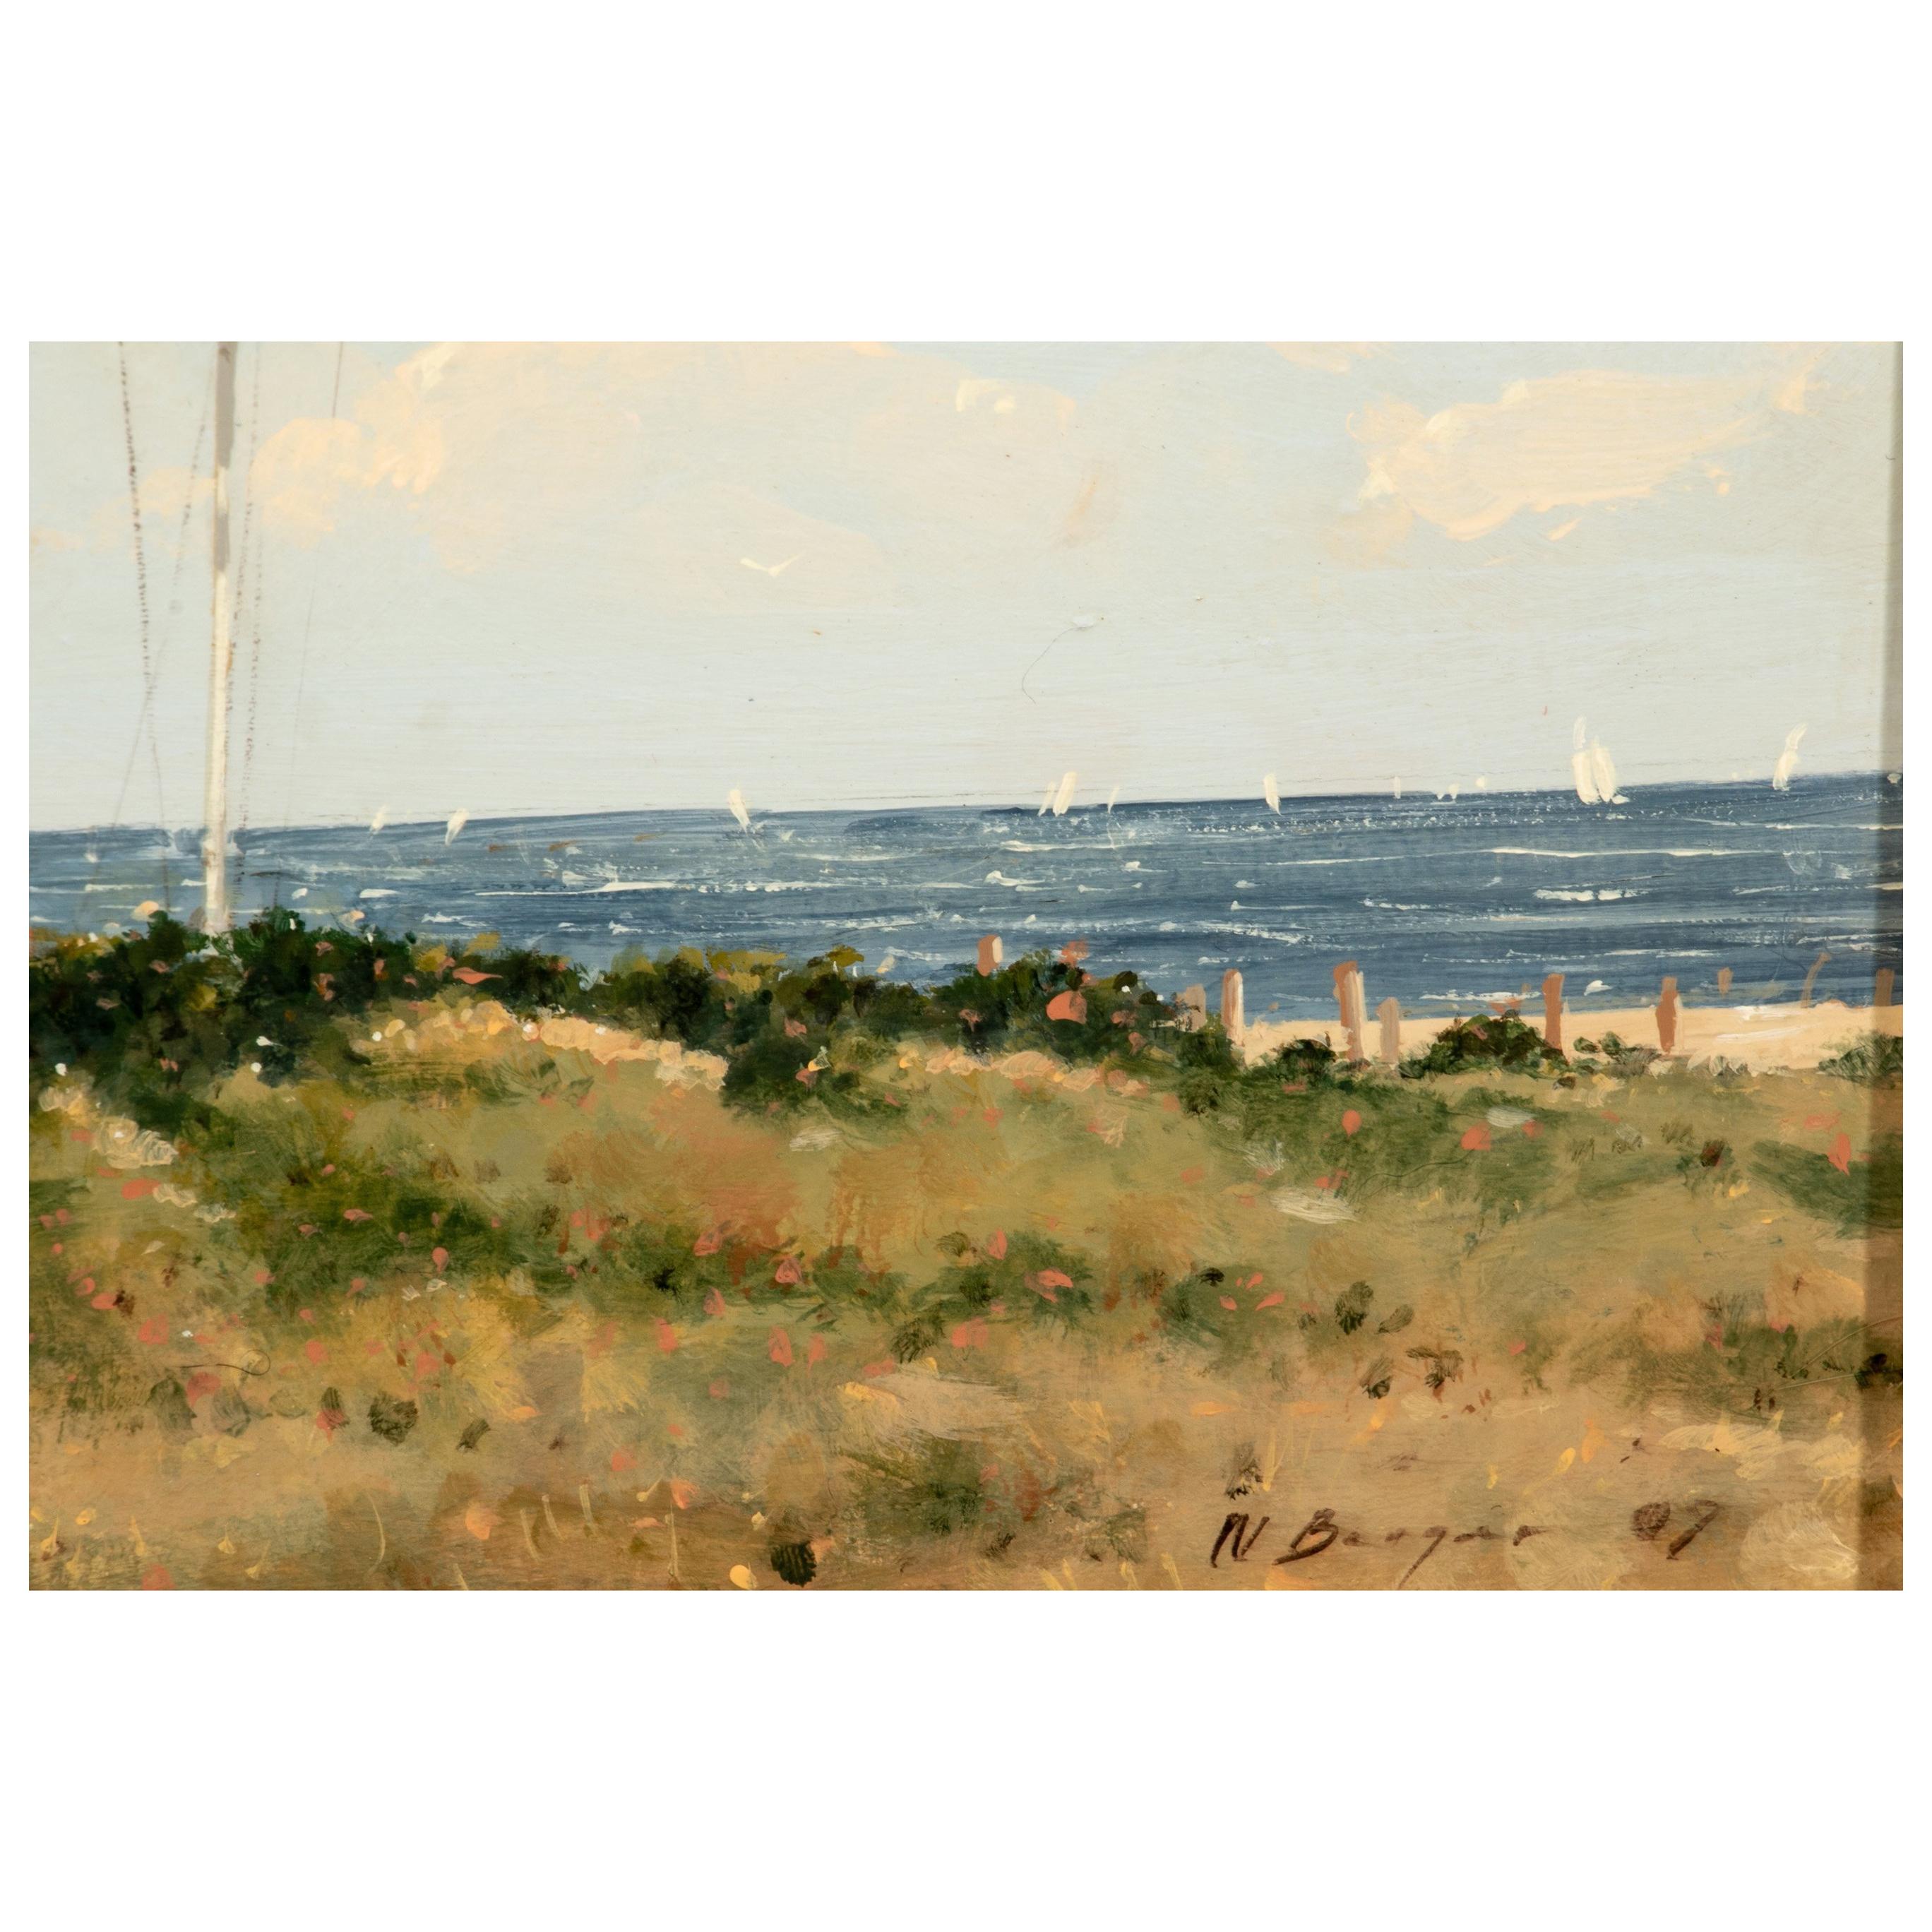 A seaside house on the water with rose bushes on the grounds and a flag blowing in the wind. Sailboats are on the water in the background.
Presented in a gilt frame. Signed lower right and dated 2009. Signed on verso.

Condition: very good with